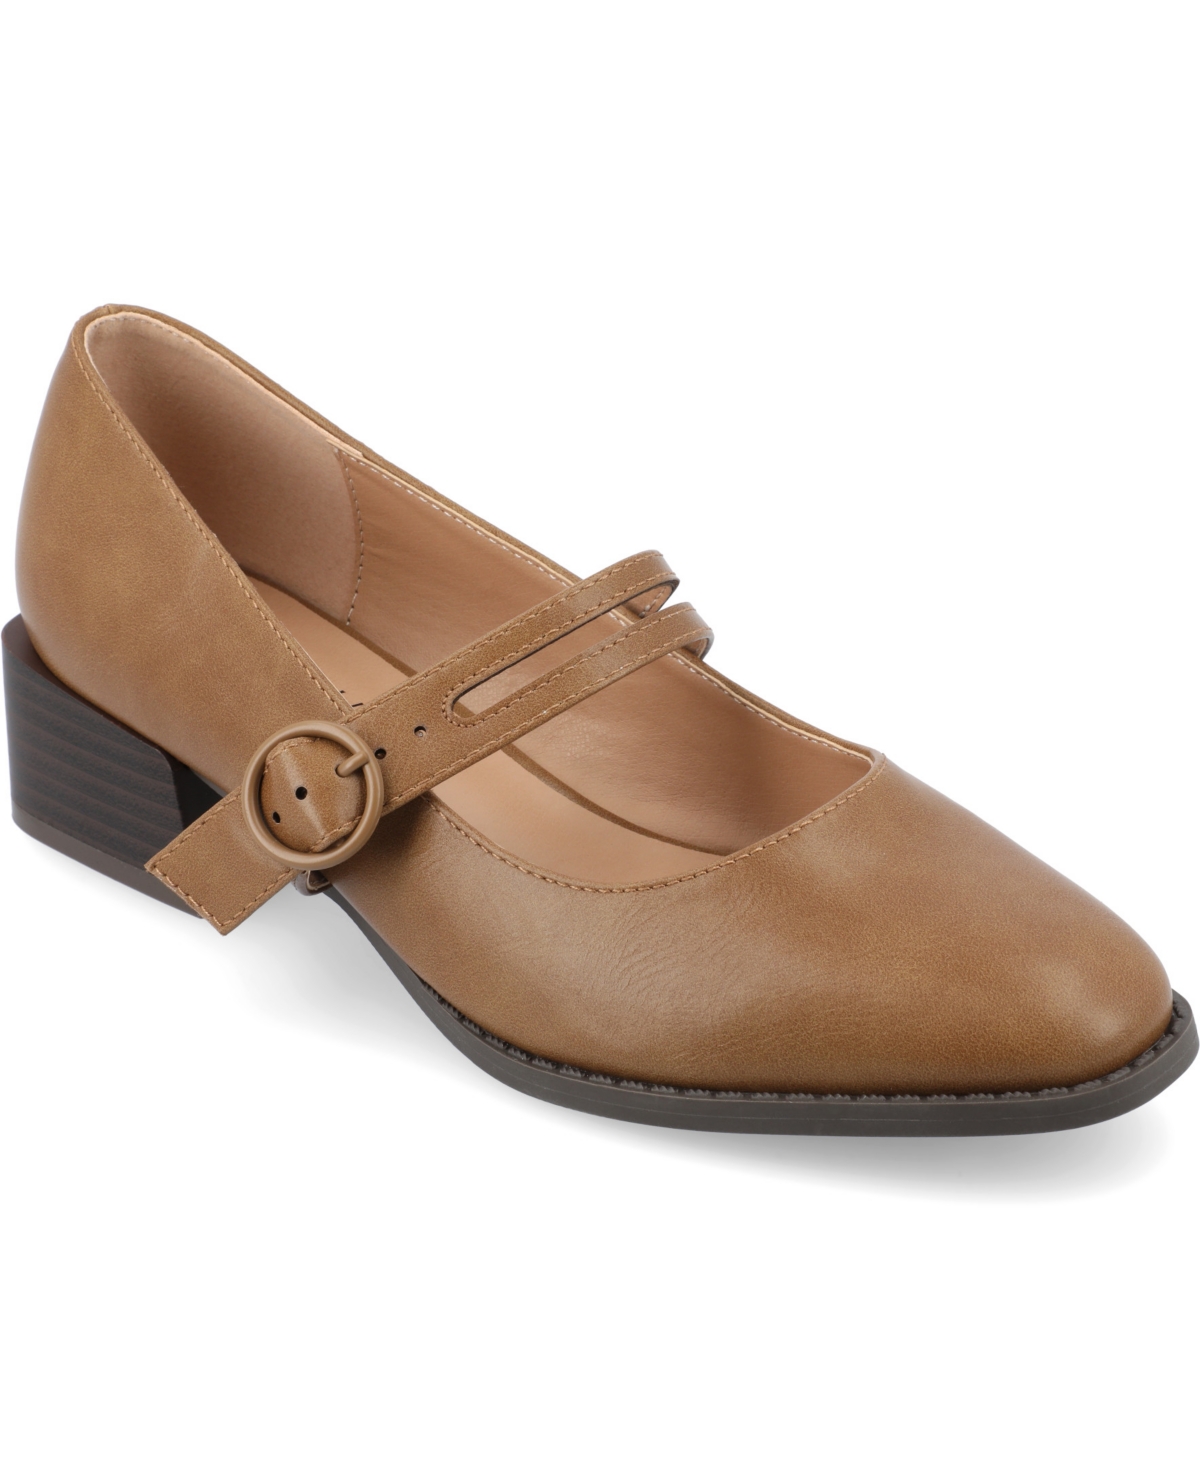 Journee Collection Savvi Mary Jane Pump In Tan